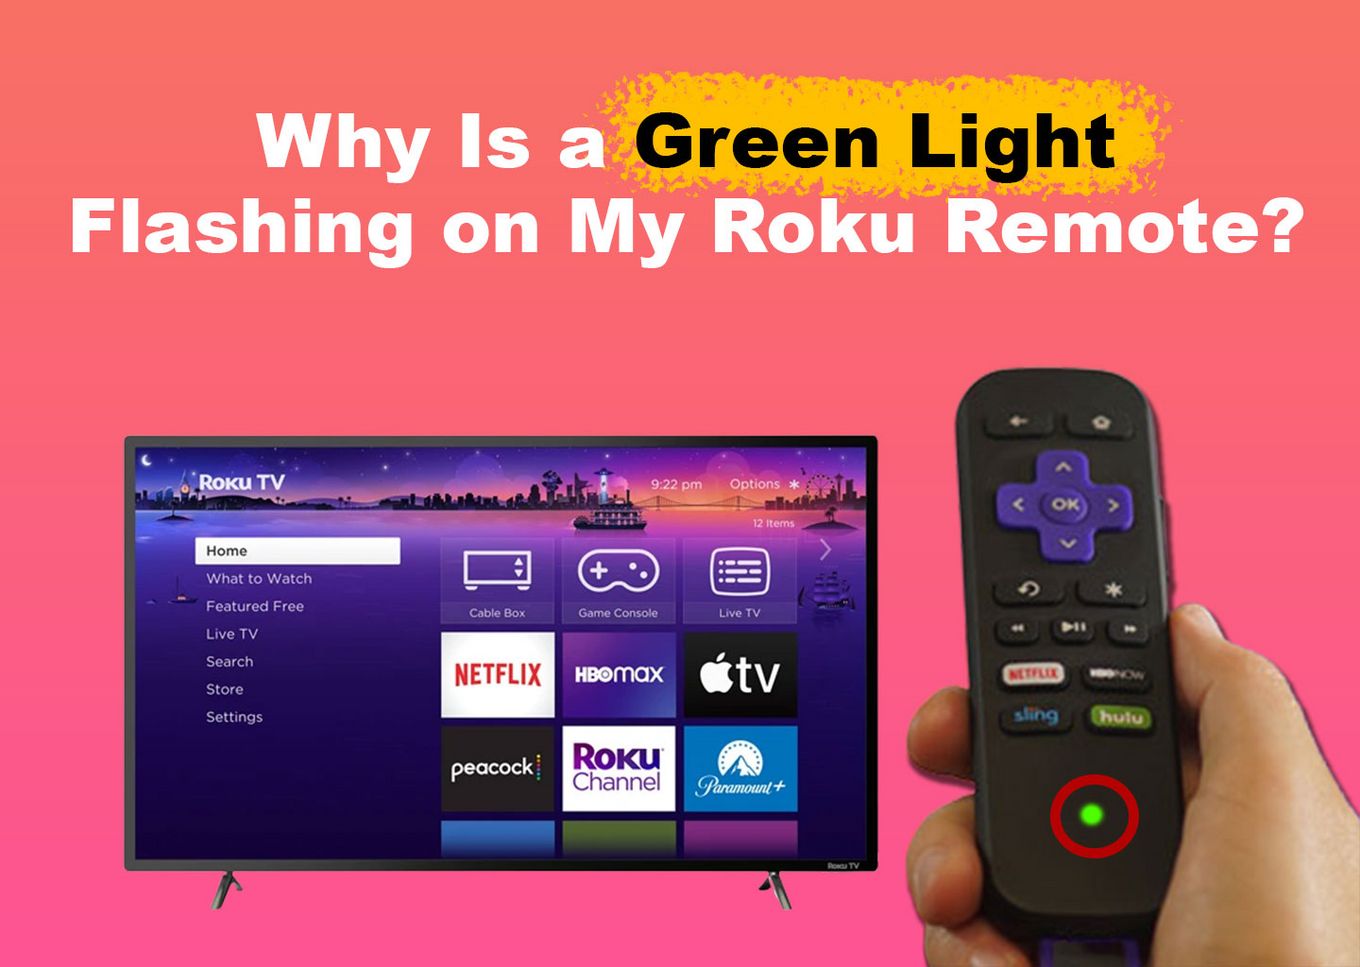 Why is a Roku remote flashing green light